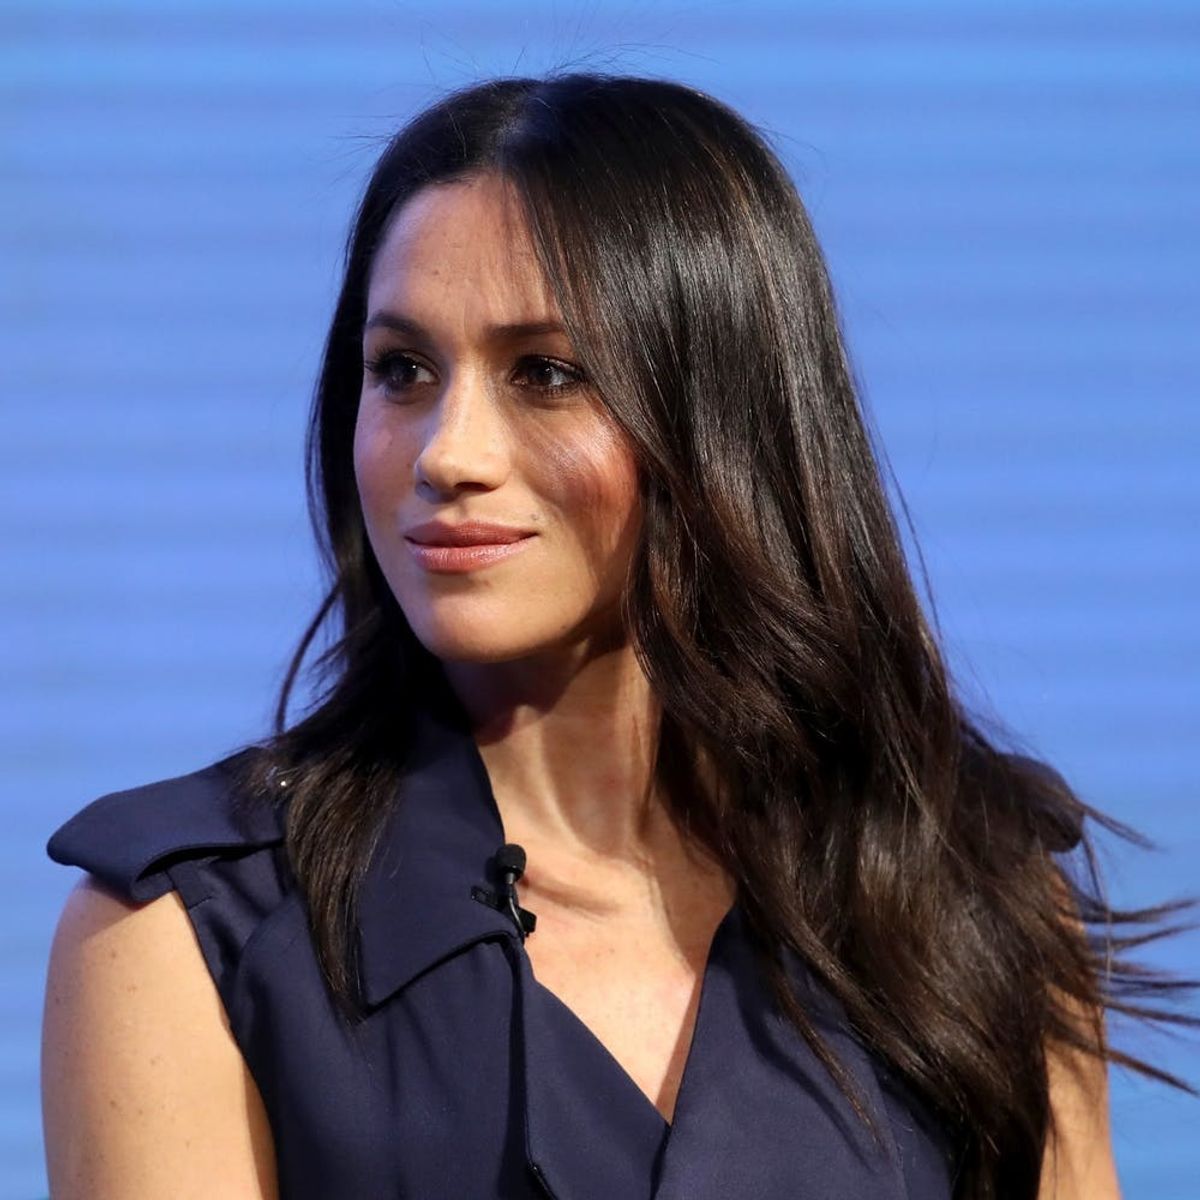 You’ll Love What Meghan Markle Just Said About Empowering Women